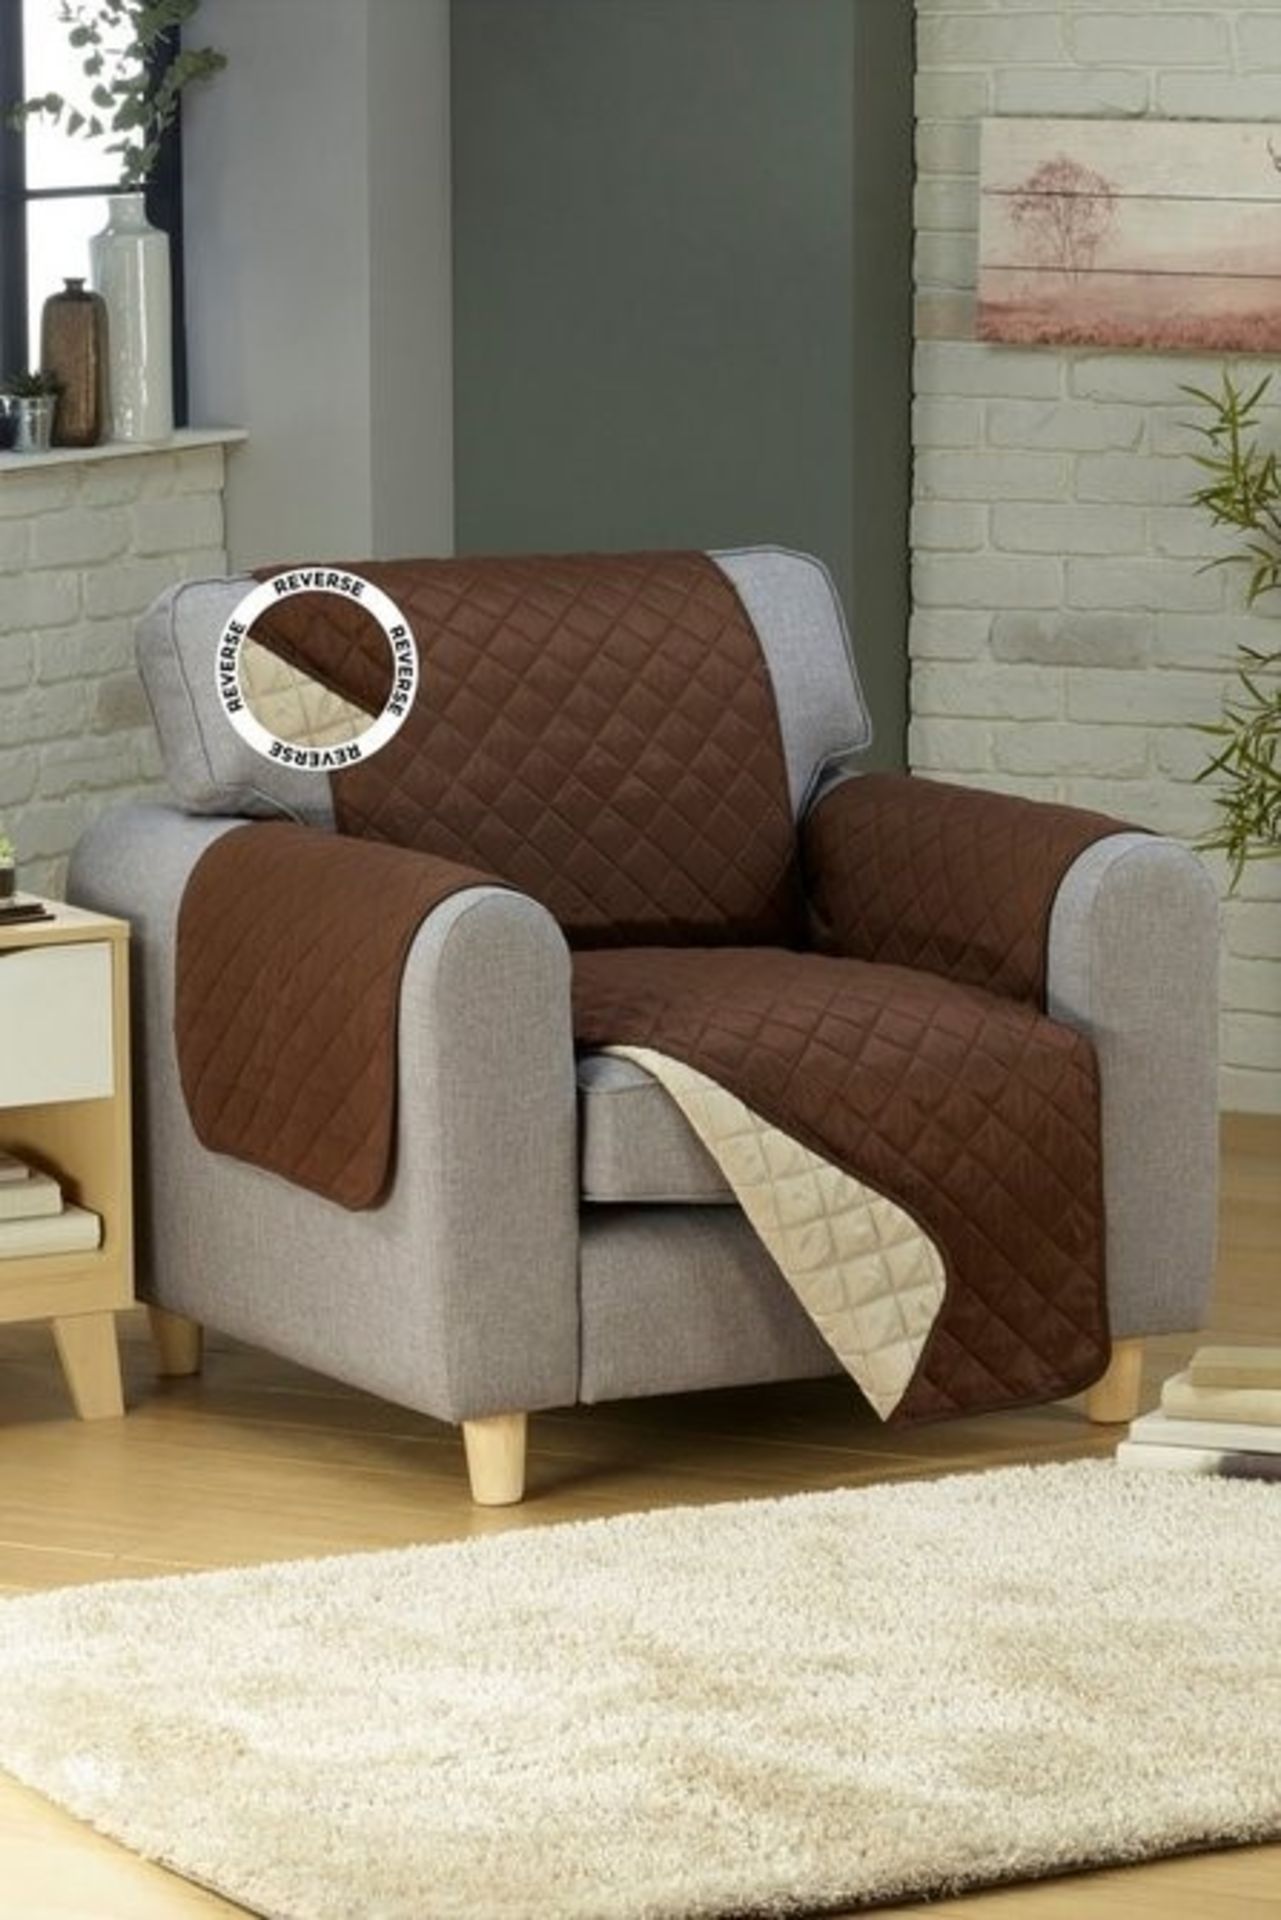 1 BAGGED REVERSIBLE FURNITURE PROTECTOR IN BROWN (PUBLIC VIEWING AVAILABLE) - Image 2 of 2